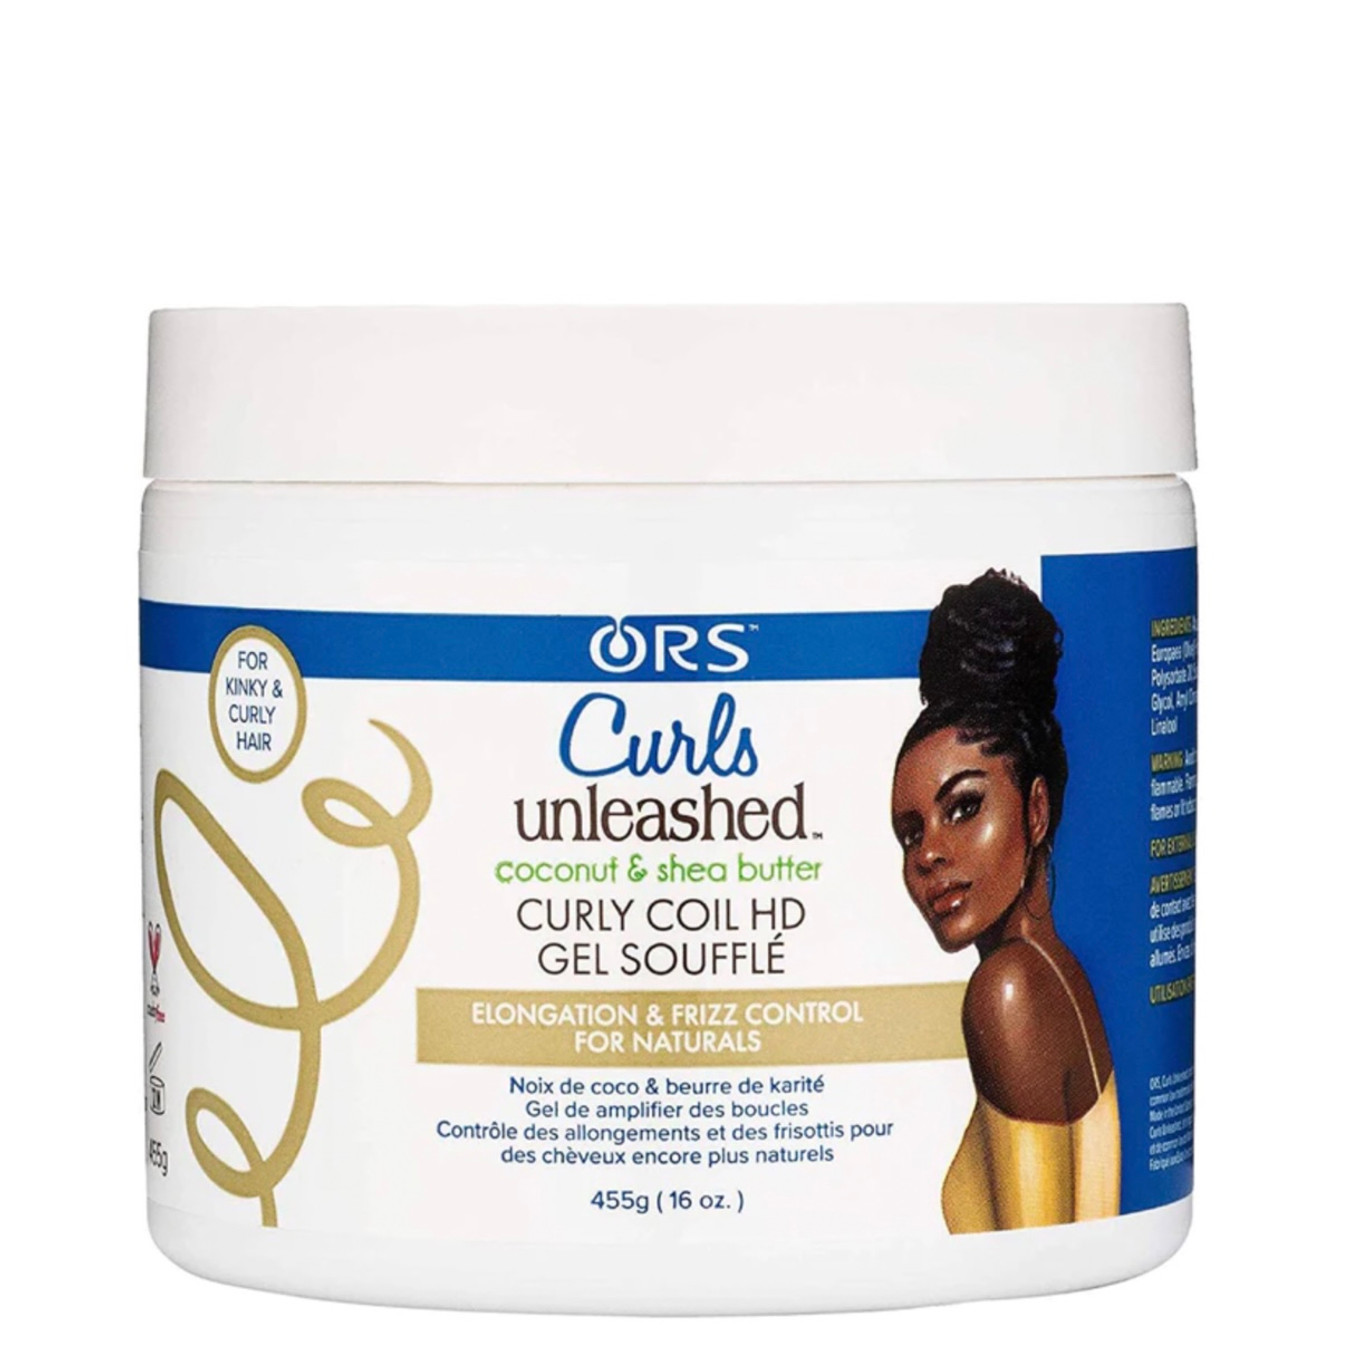 ORS Curls Unleashed Coconut & Shea Butter Curly Coil HD Gel Souffle